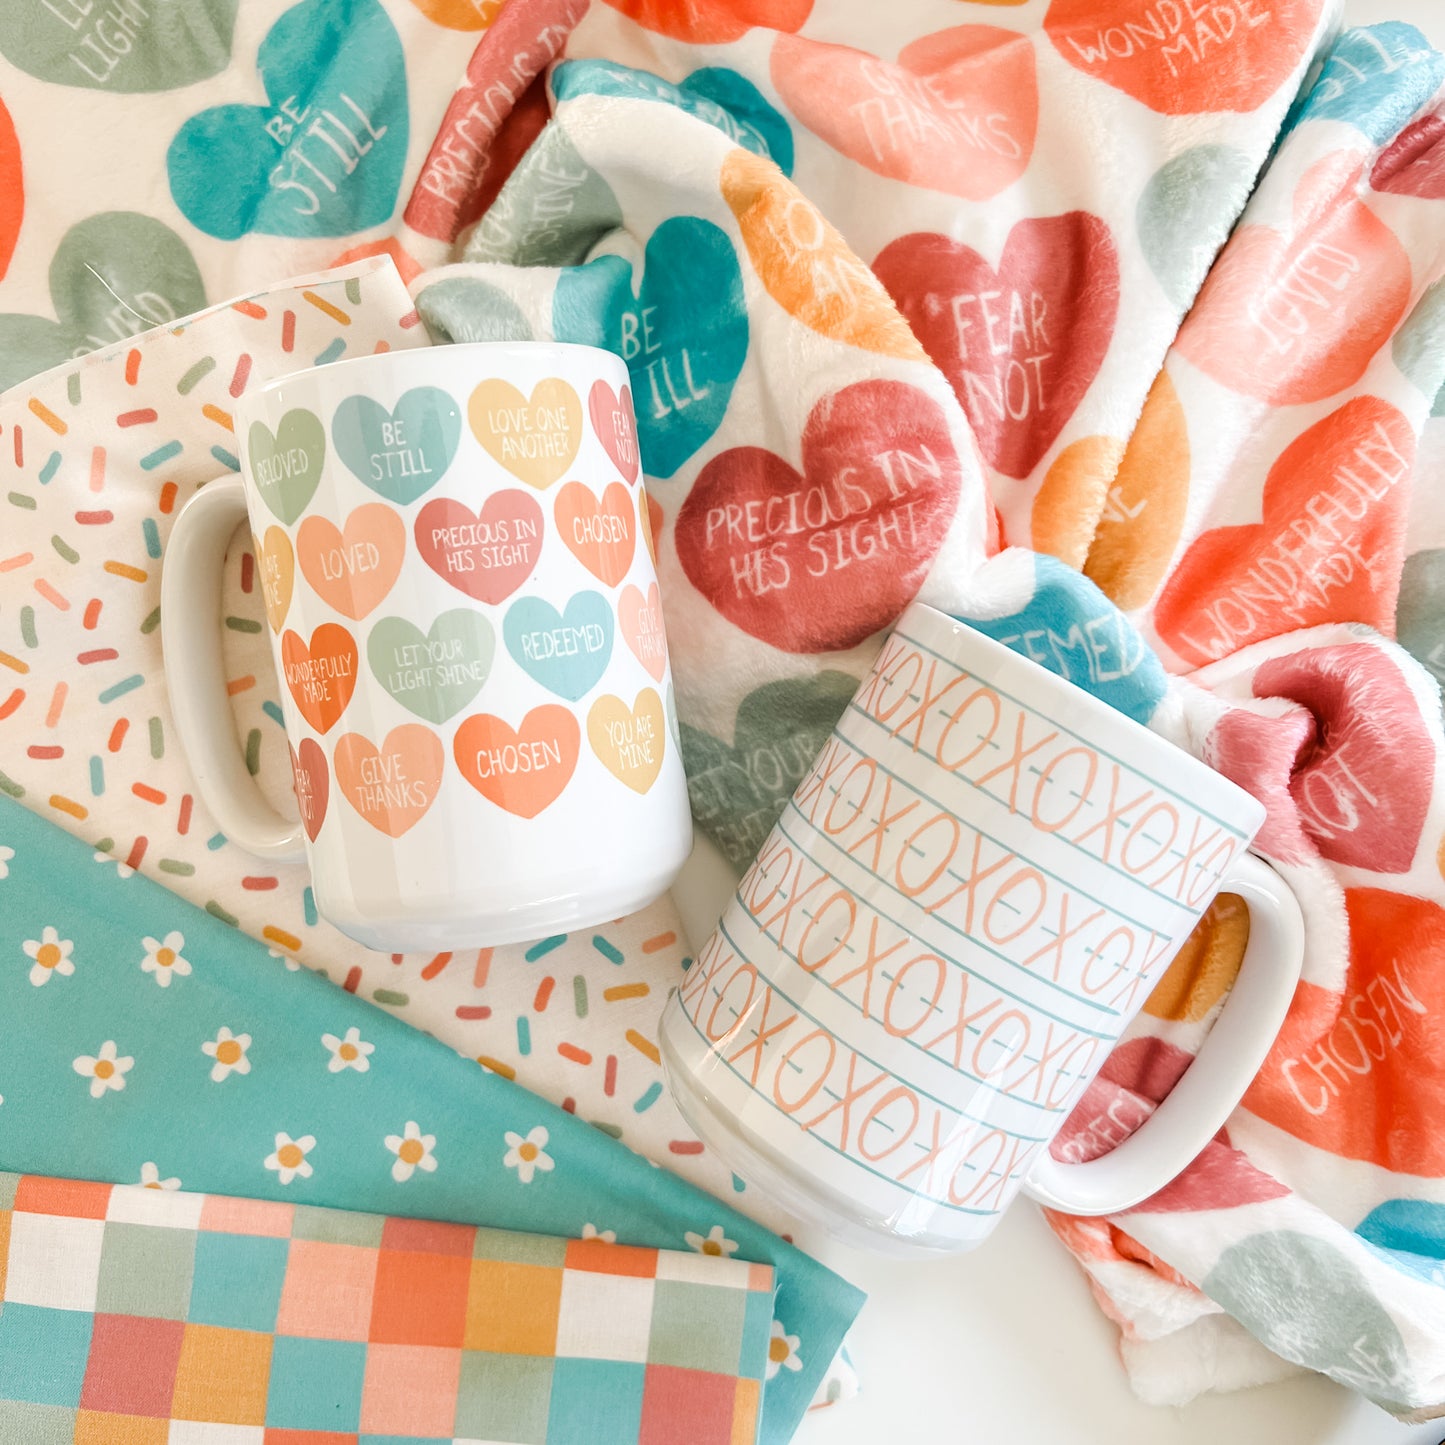 Limited Edition Scripture Candy Hearts Valentine Mug